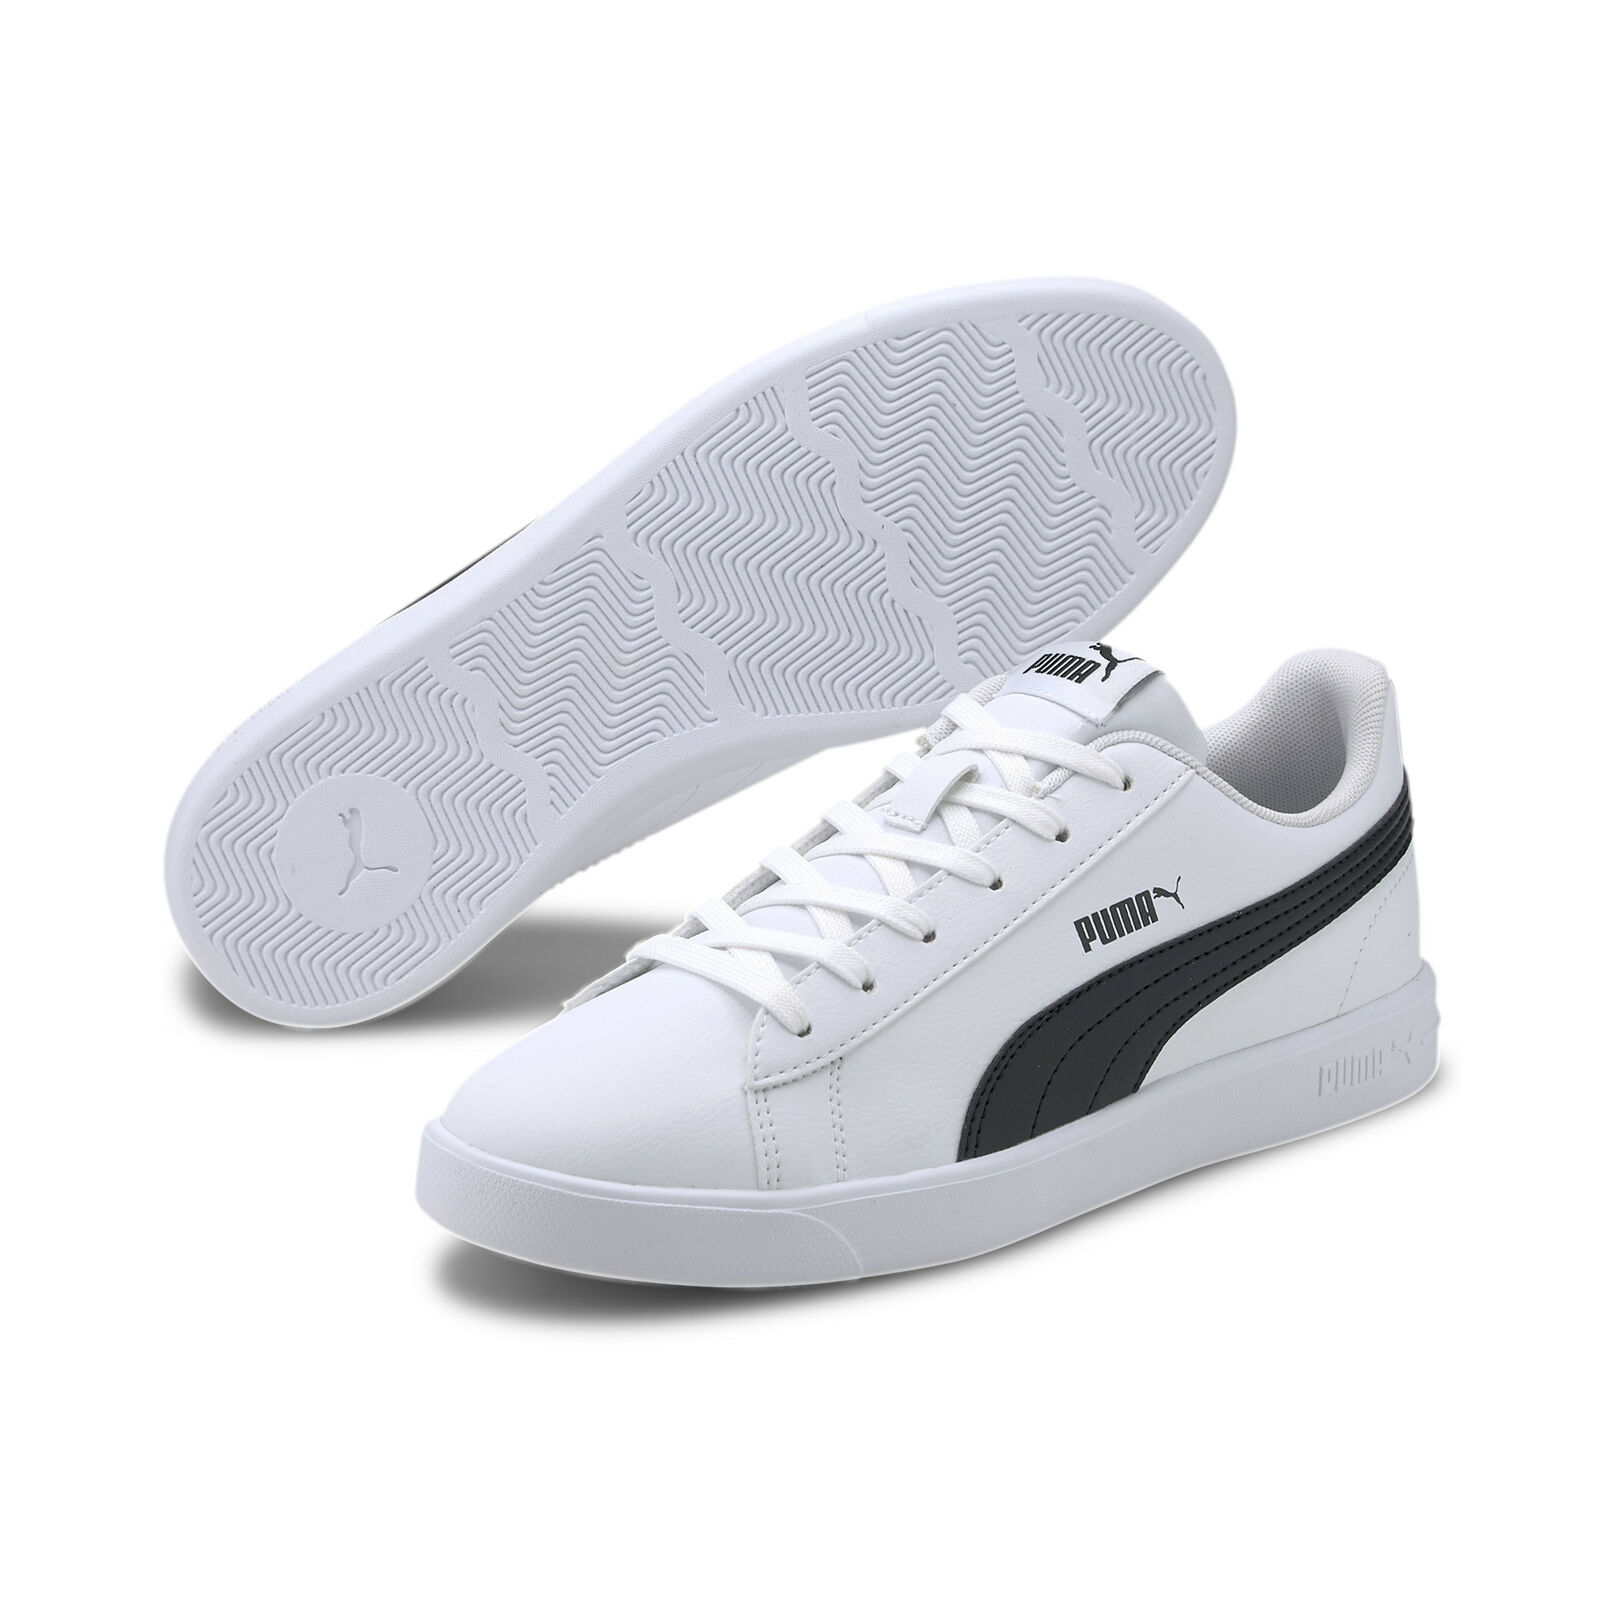 Giày thể thao nữ PUMA Women's UP Sneakers